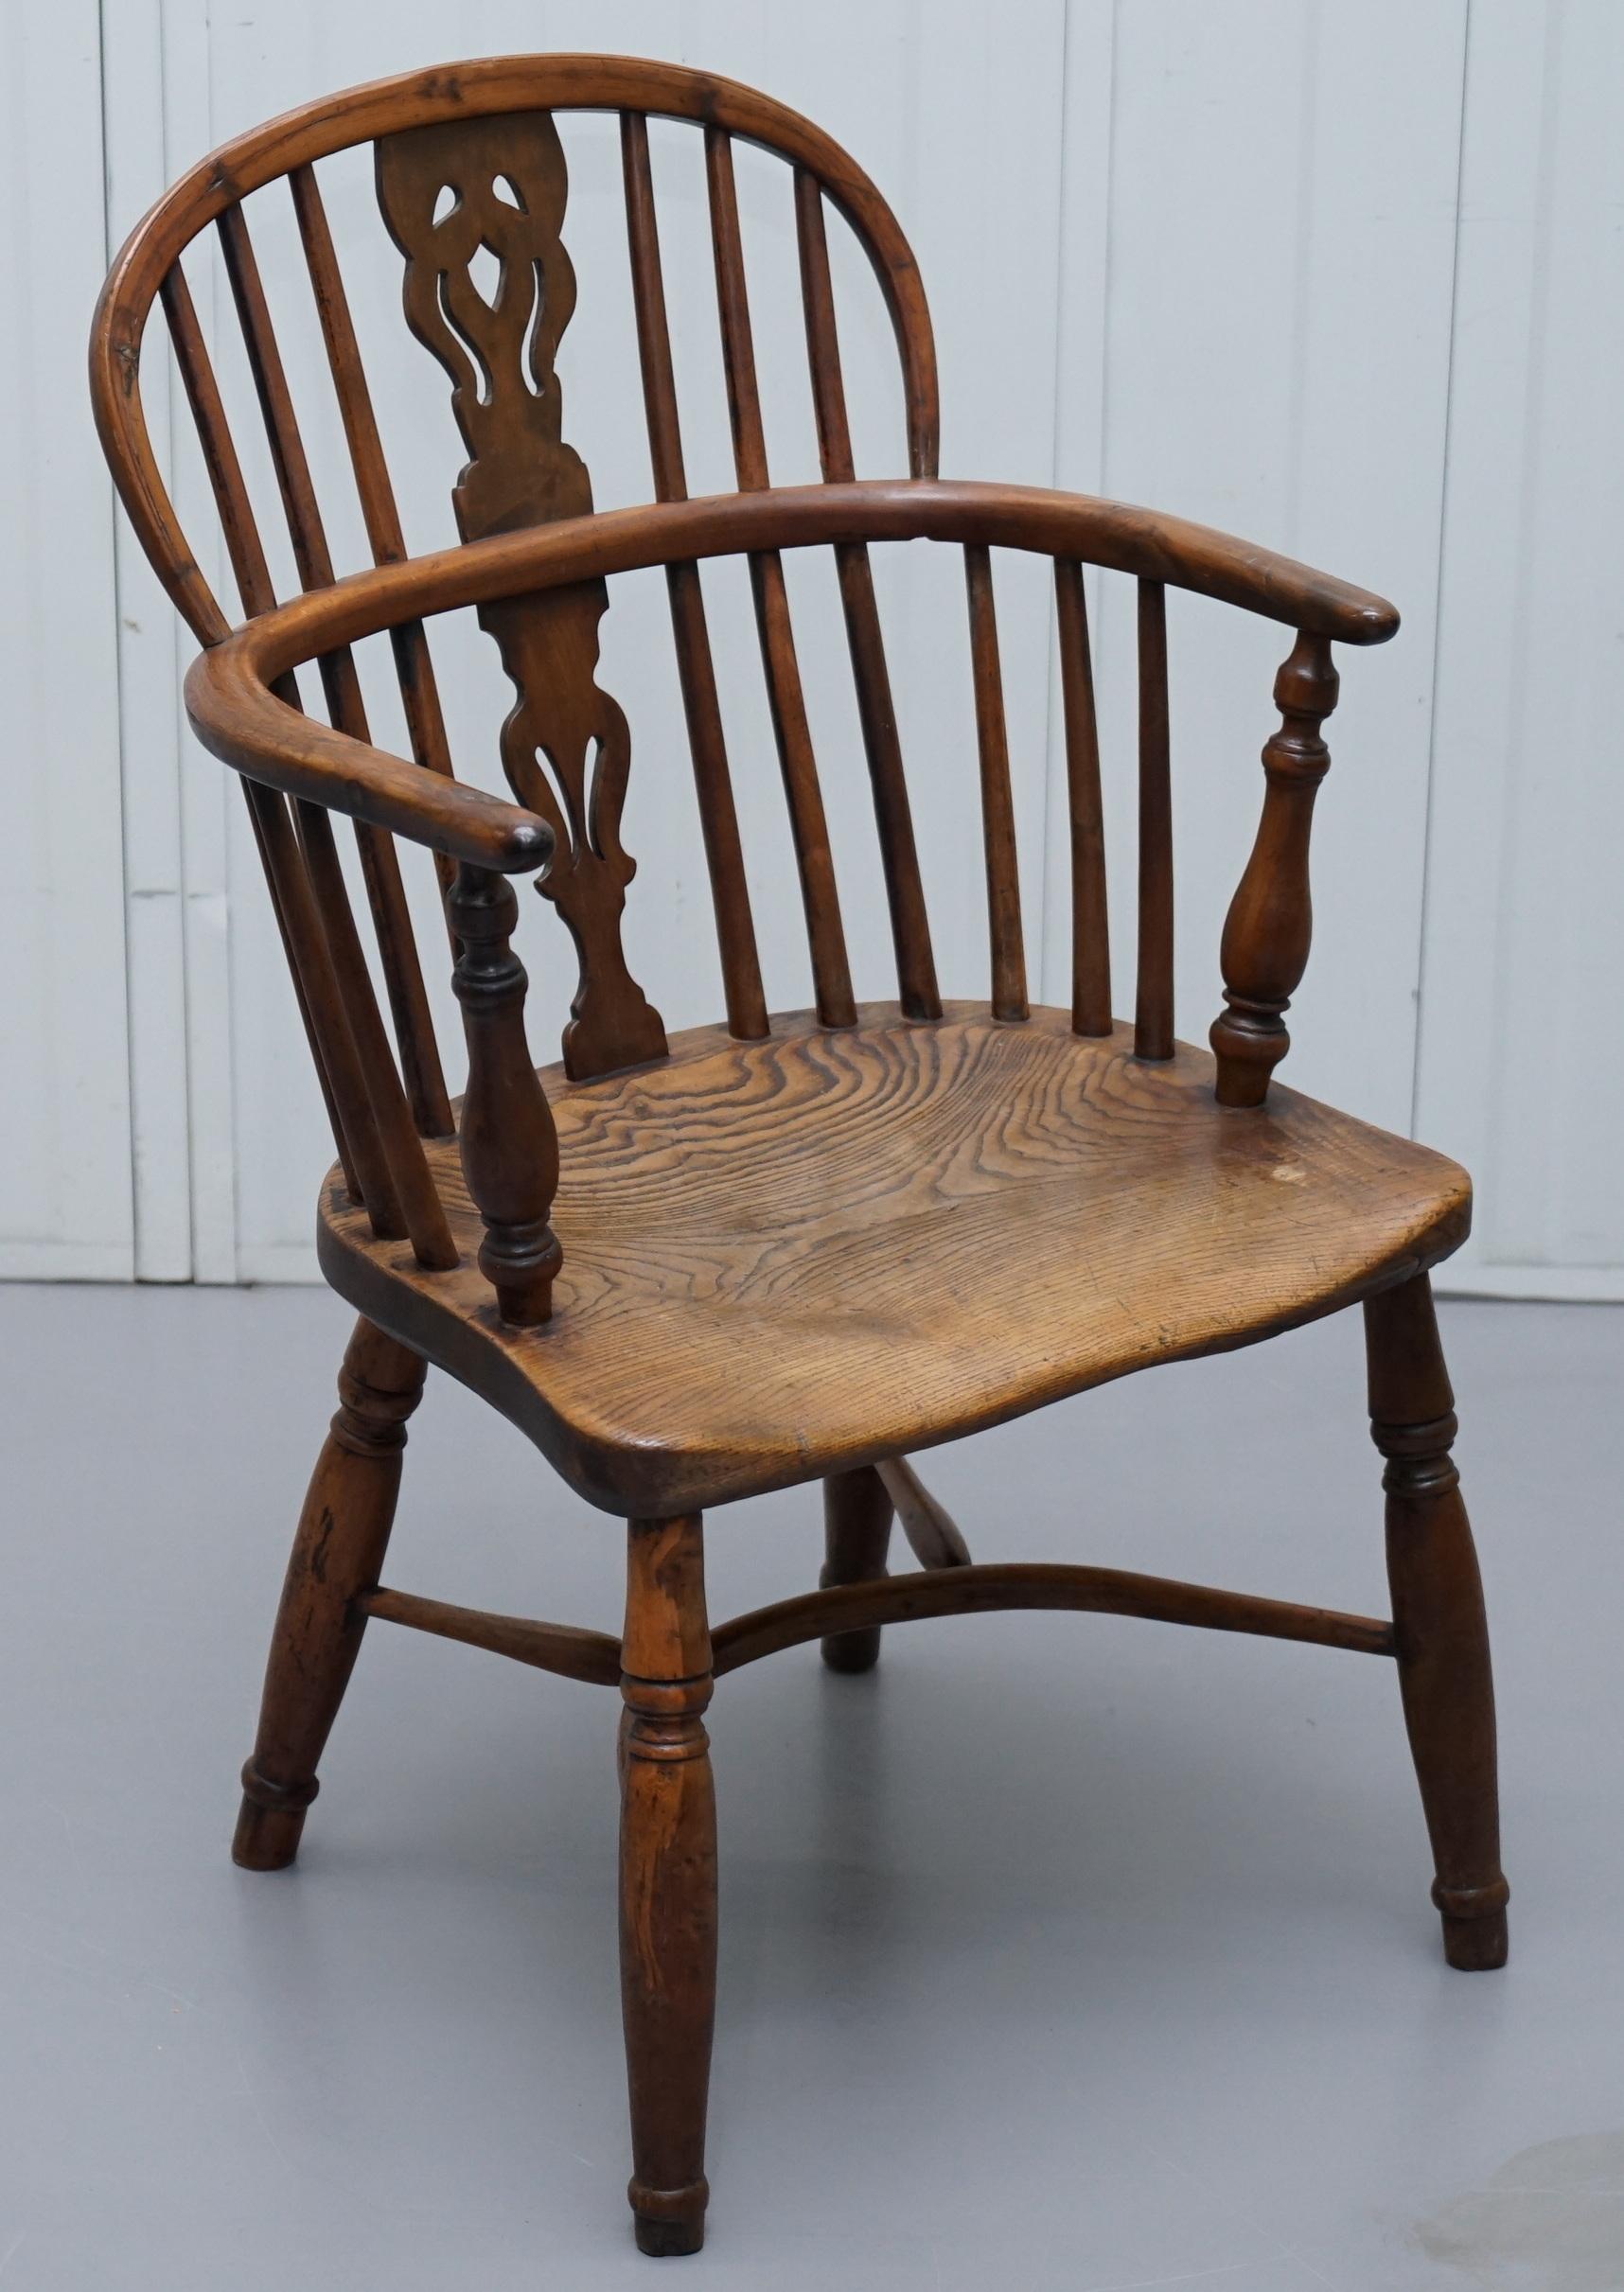 We are delighted to offer for sale this stunning pair of early 19th century Burr Yew wood and Elm Windsor armchairs

A highly coveted, well made and decorative pair of armchairs, they are in the best timber materials to find them in, Burr Yew wood